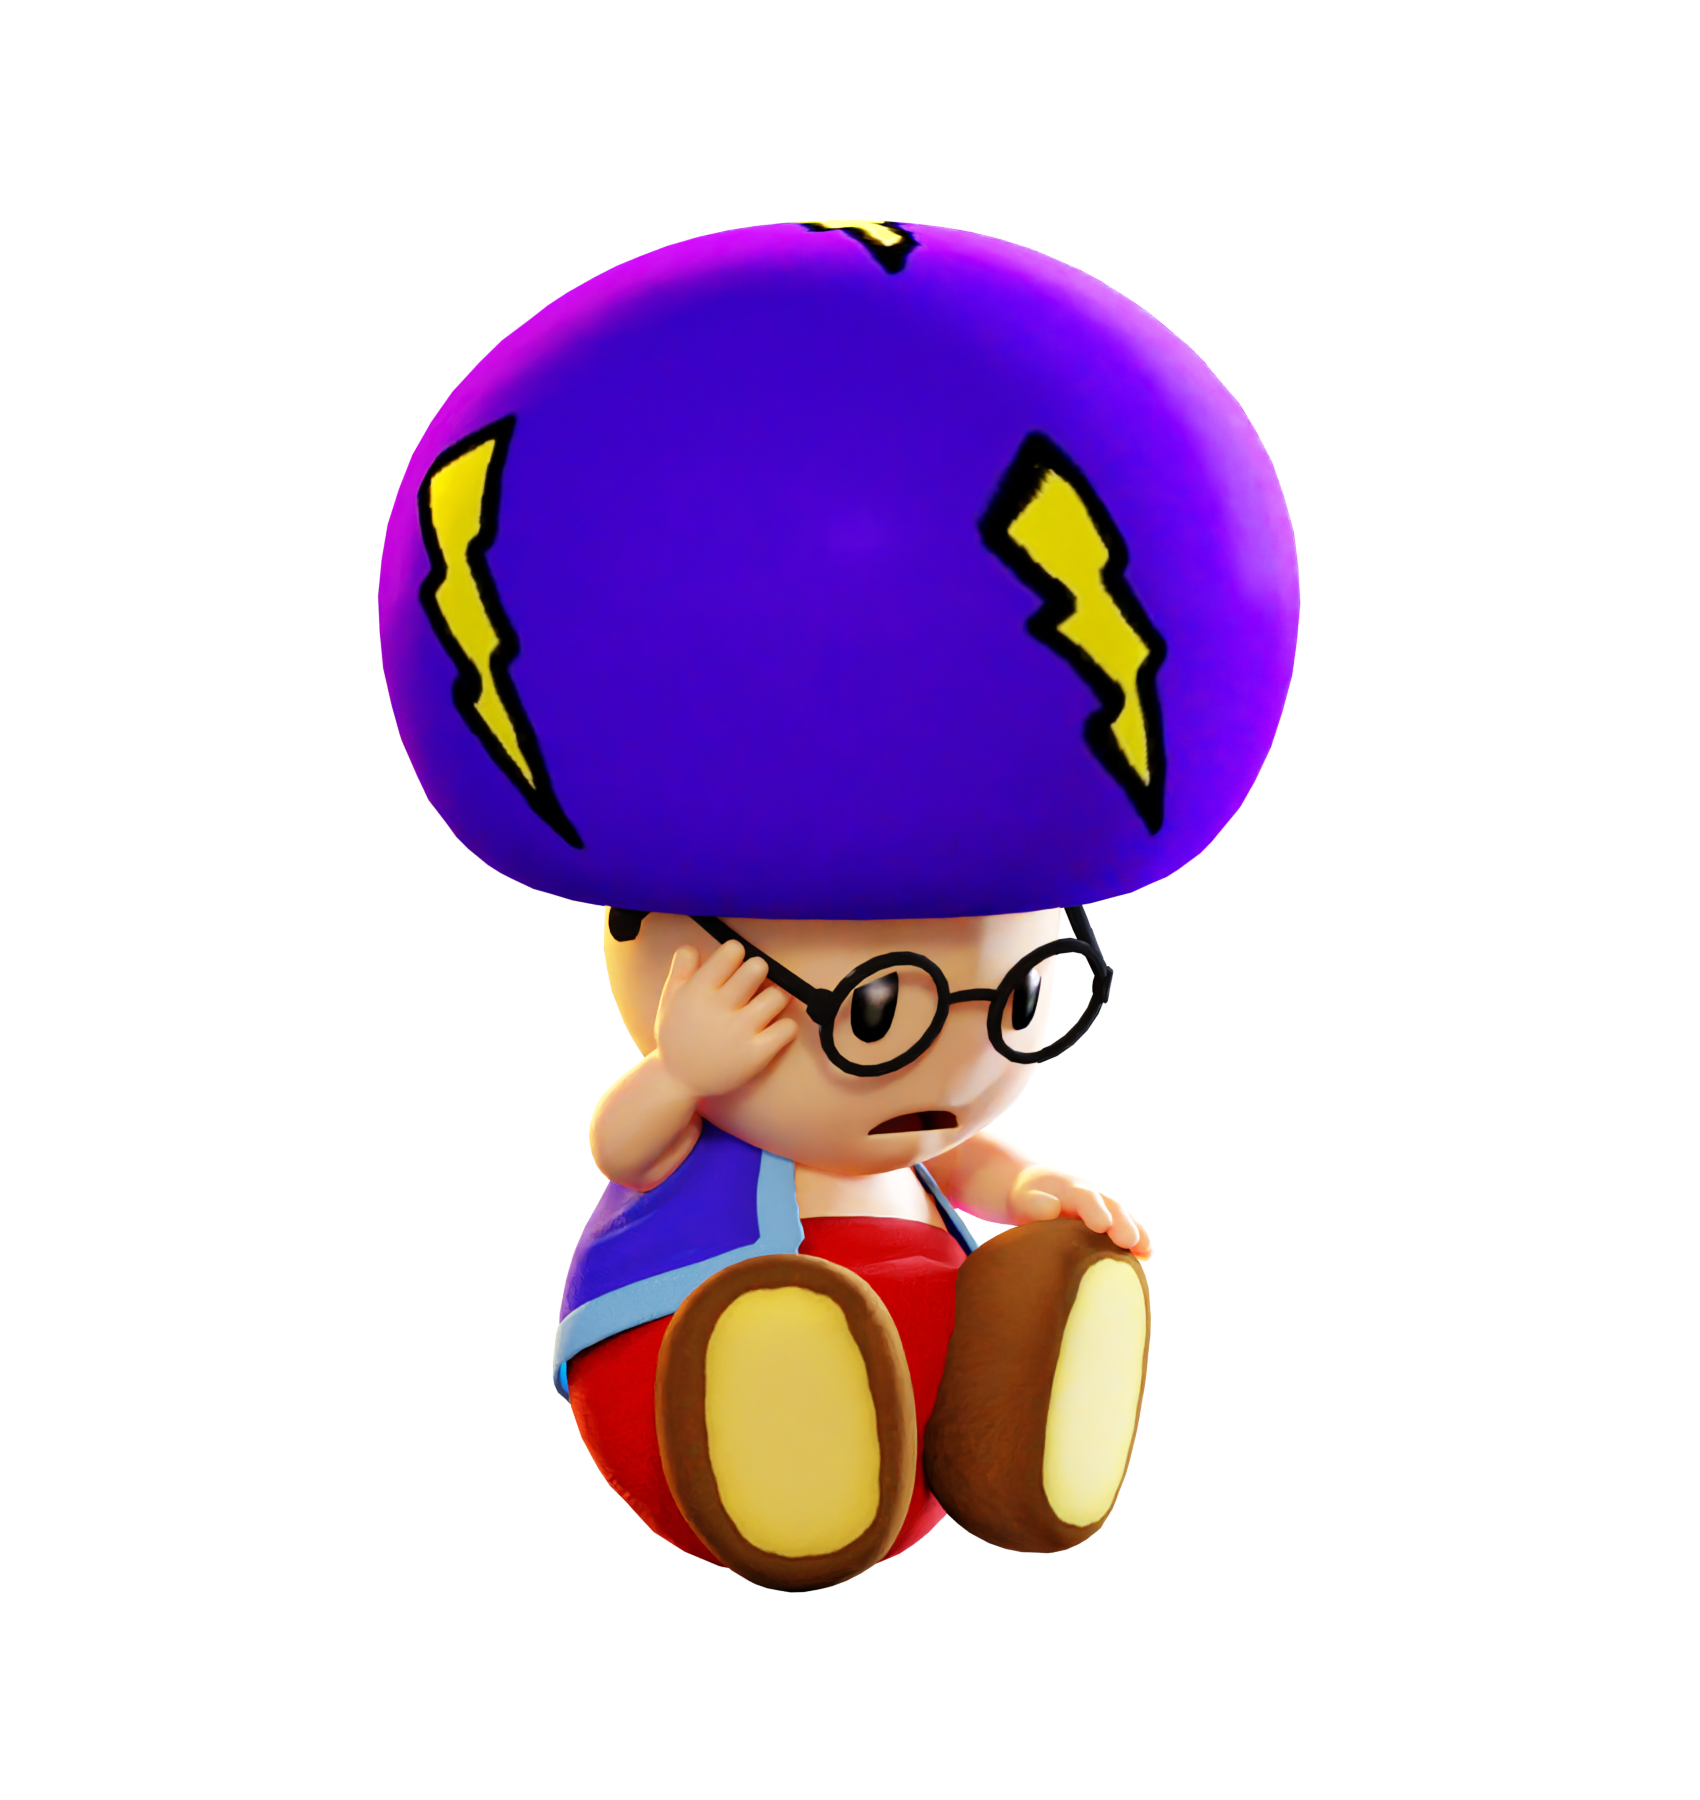 Oof Buttons, The SMG4/GLITCH Wiki